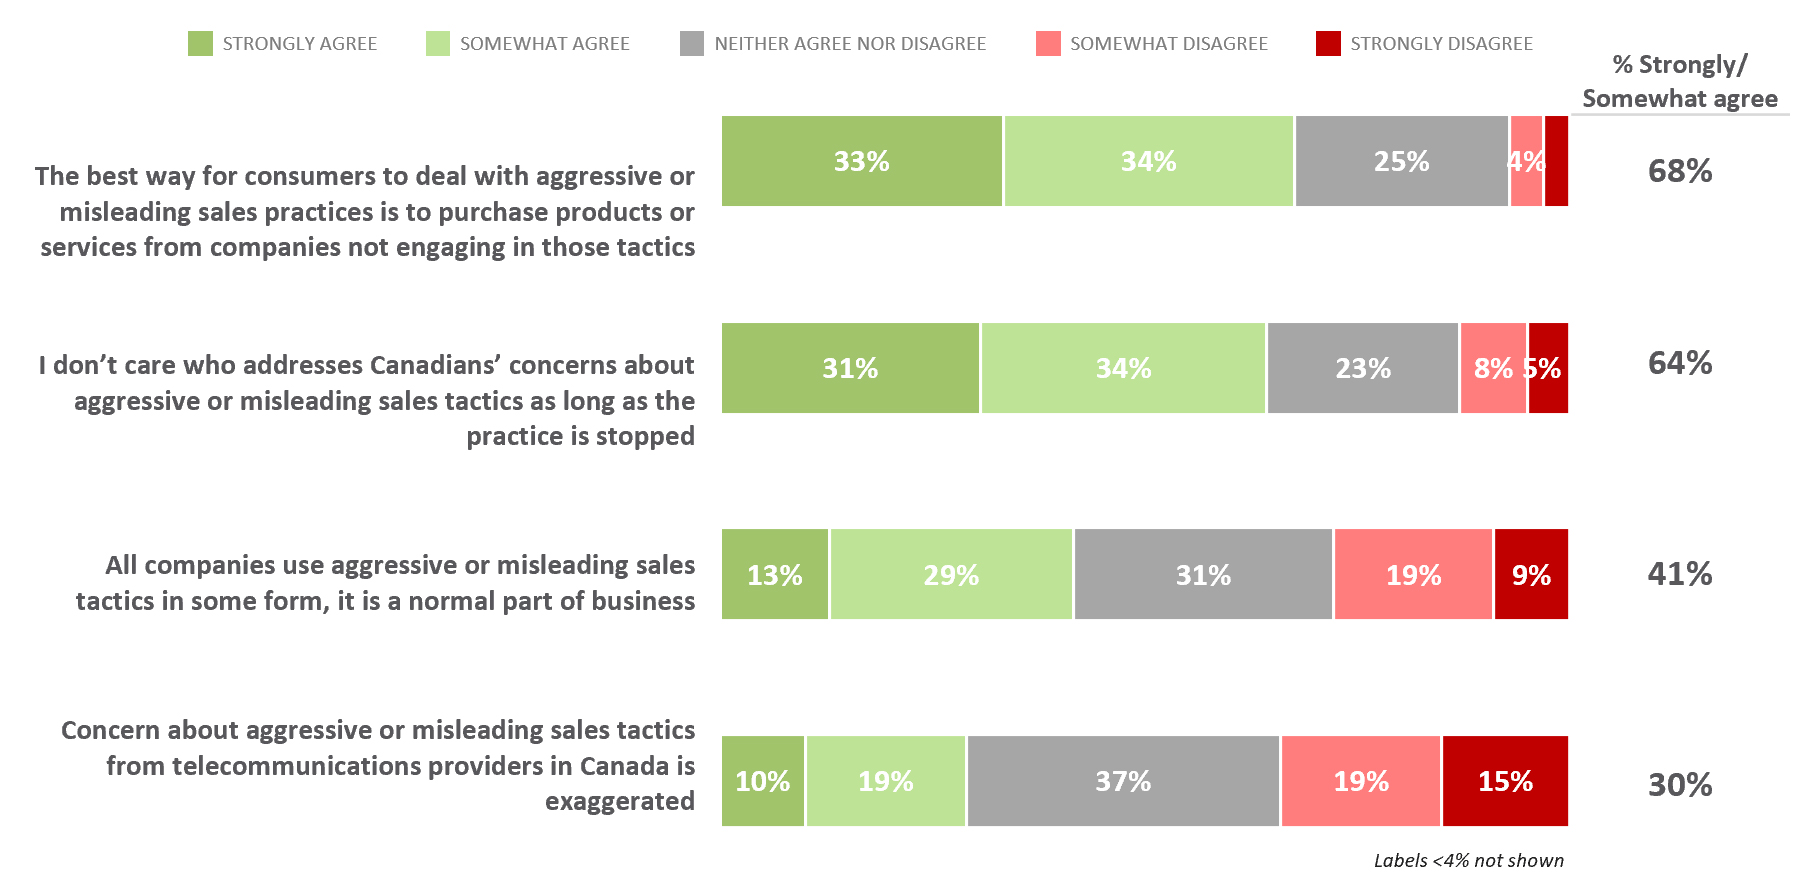 Figure 13: Attitudes and Opinions towards aggressive or misleading sales practices